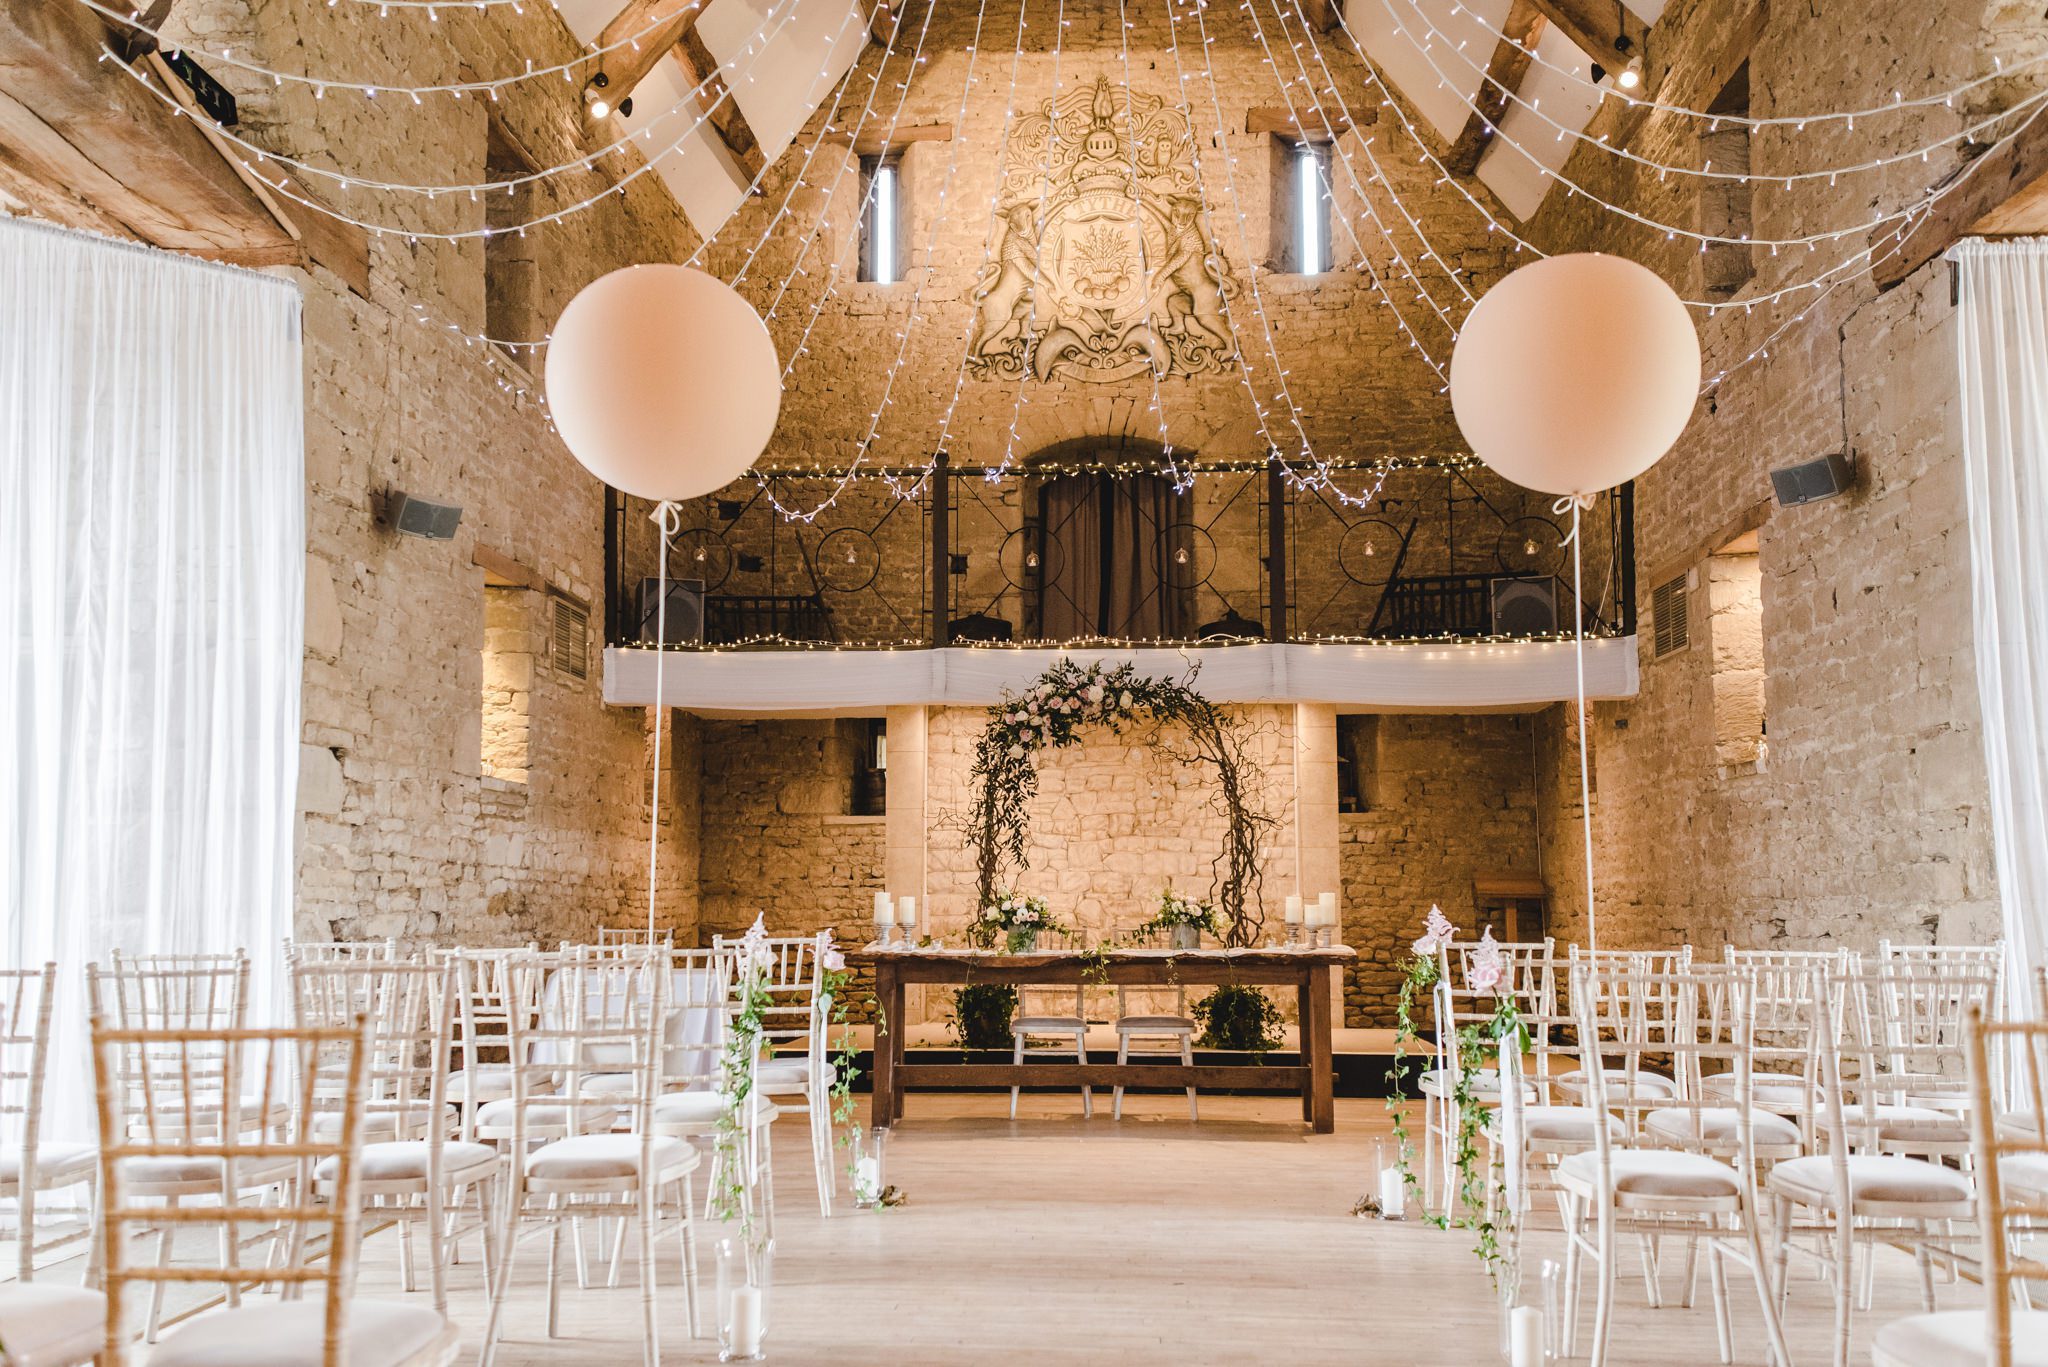 Ceremony room set up for a wedding at the great tythe barn